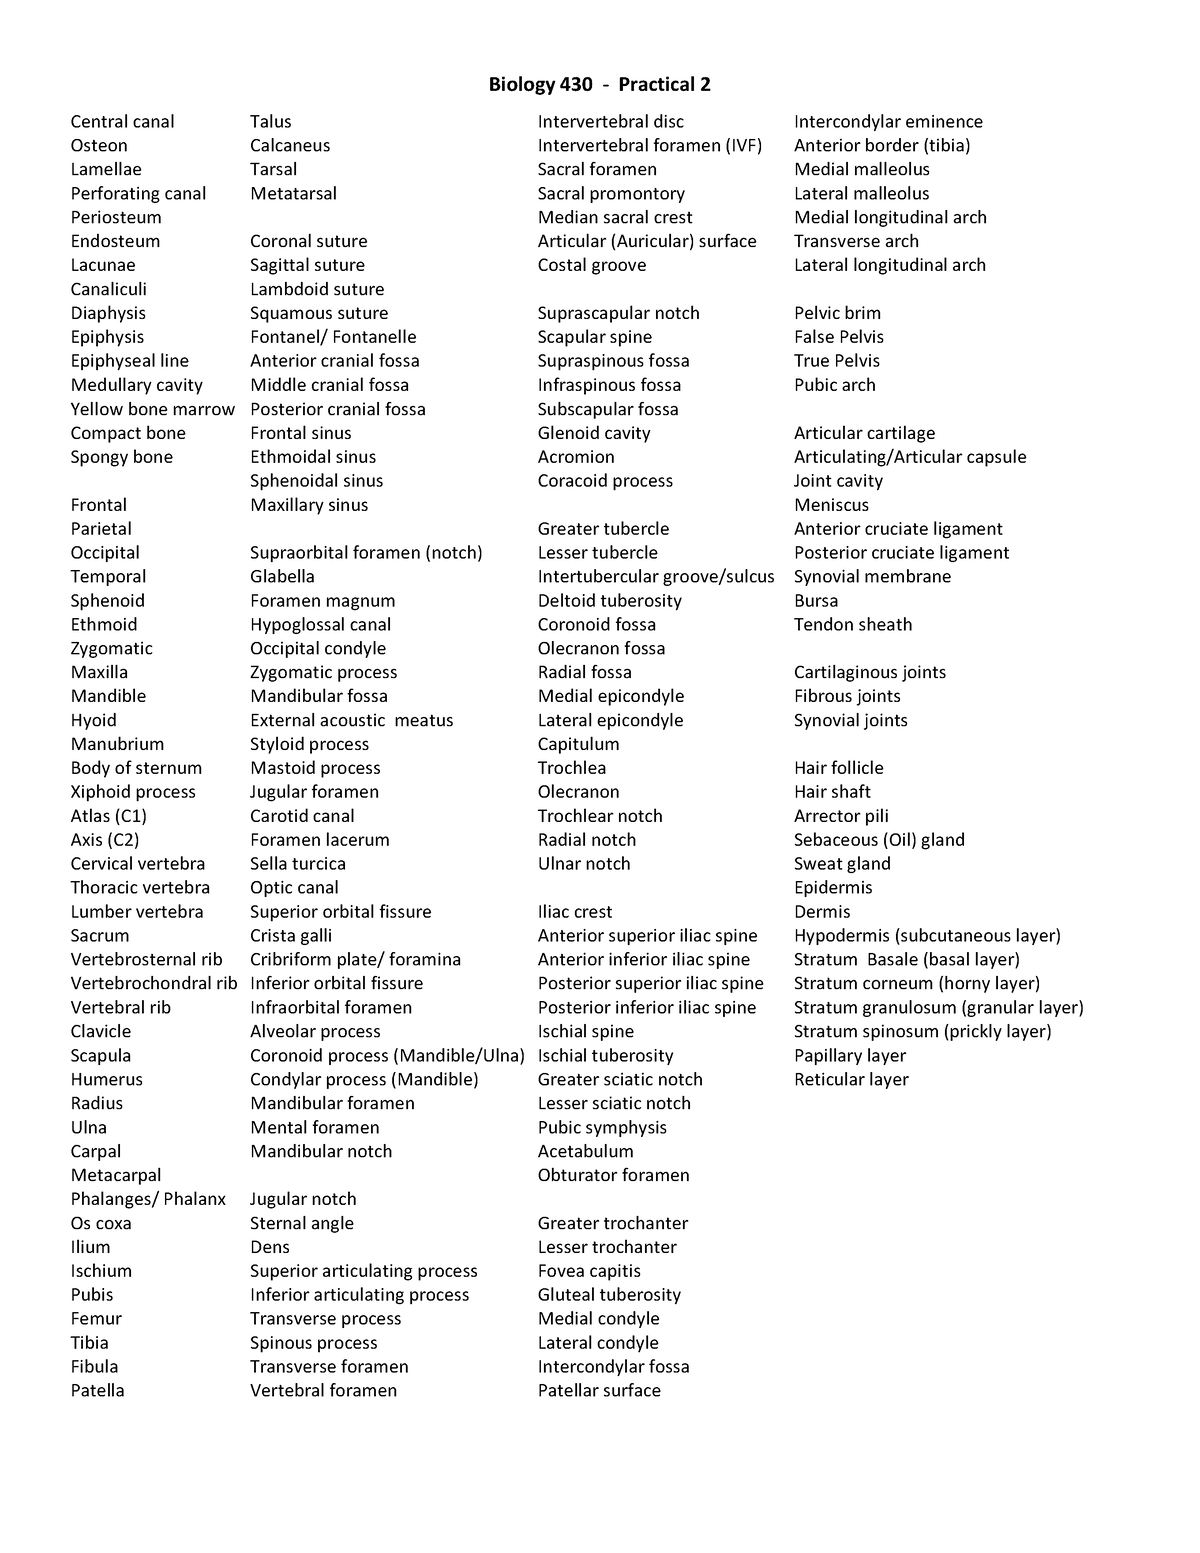 Practical+2+Keys - chart - Biology 430 - Practical 2 Central canal ...